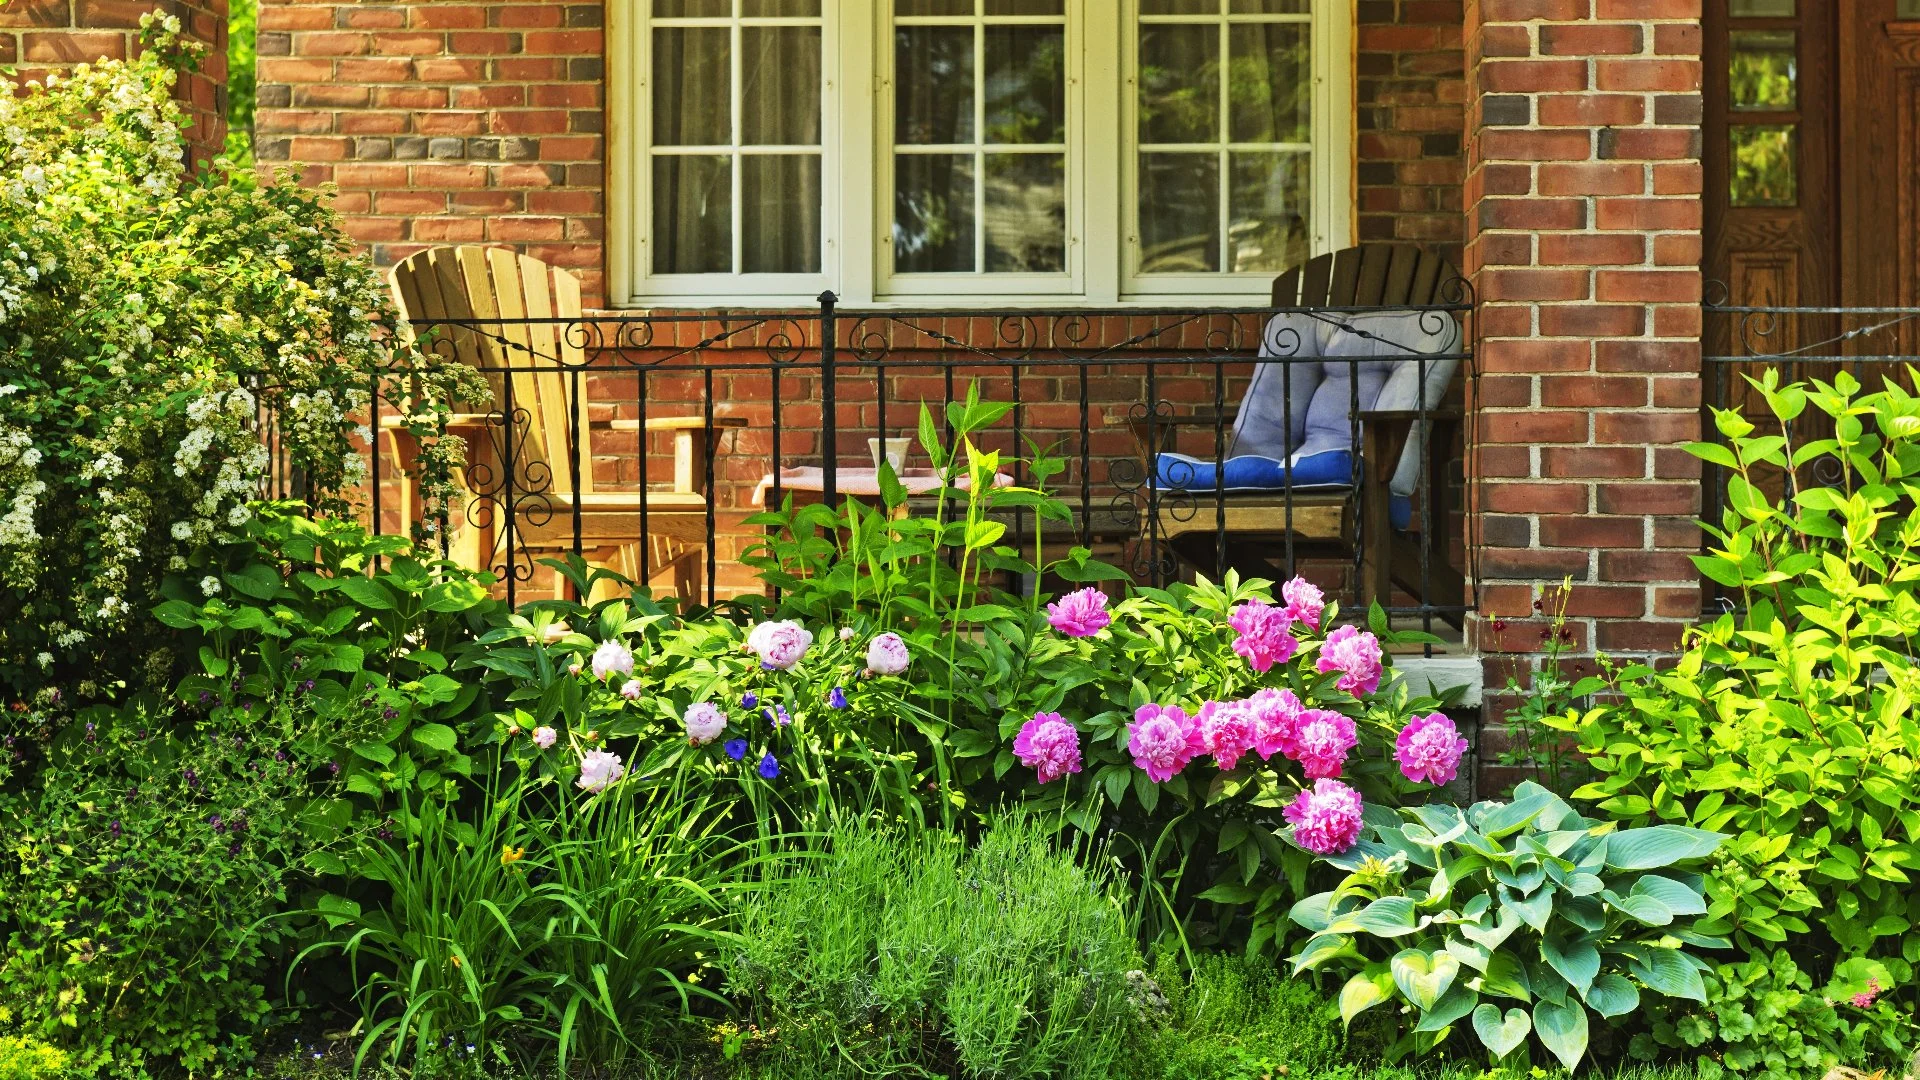 Struggling To Keep Your Lawn Lush & Green? This Might Be the Issue